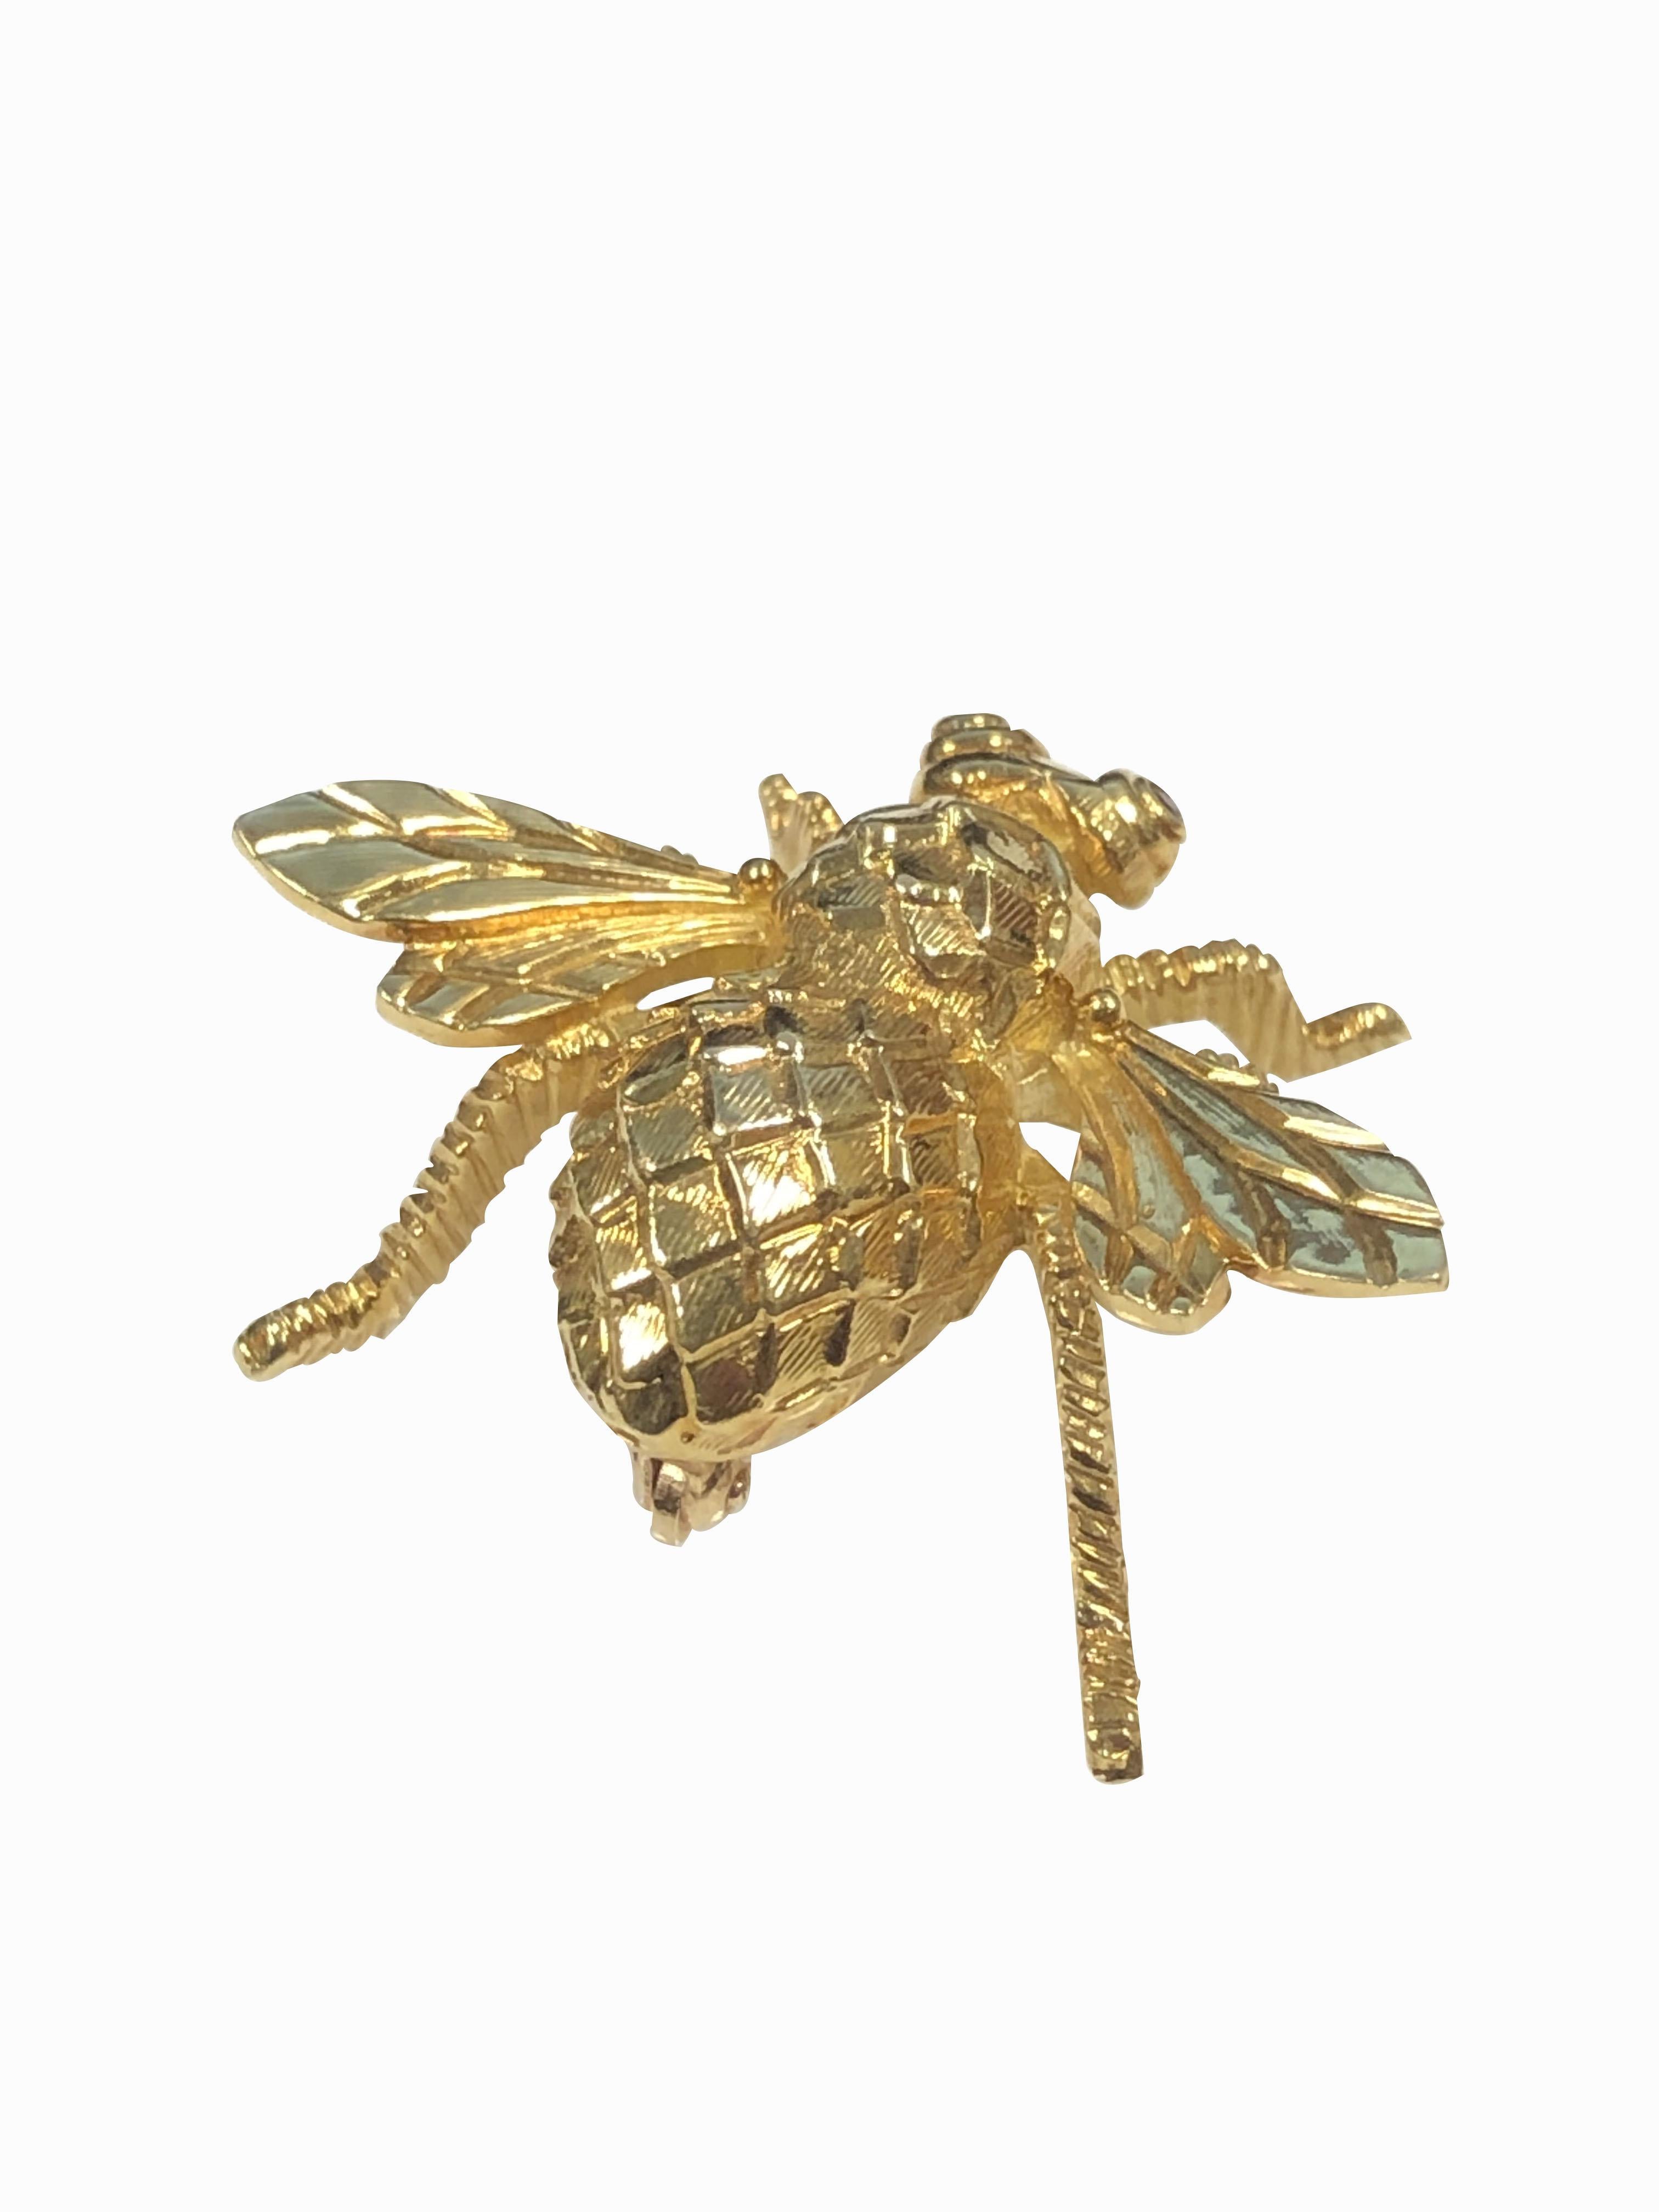 Circa 1980s Herbert Rosenthal Bee Brooch, measuring 1 inch in length and 1 1/4 inches in length from Wing tip to tip, very fine details with Ruby set Eyes. 